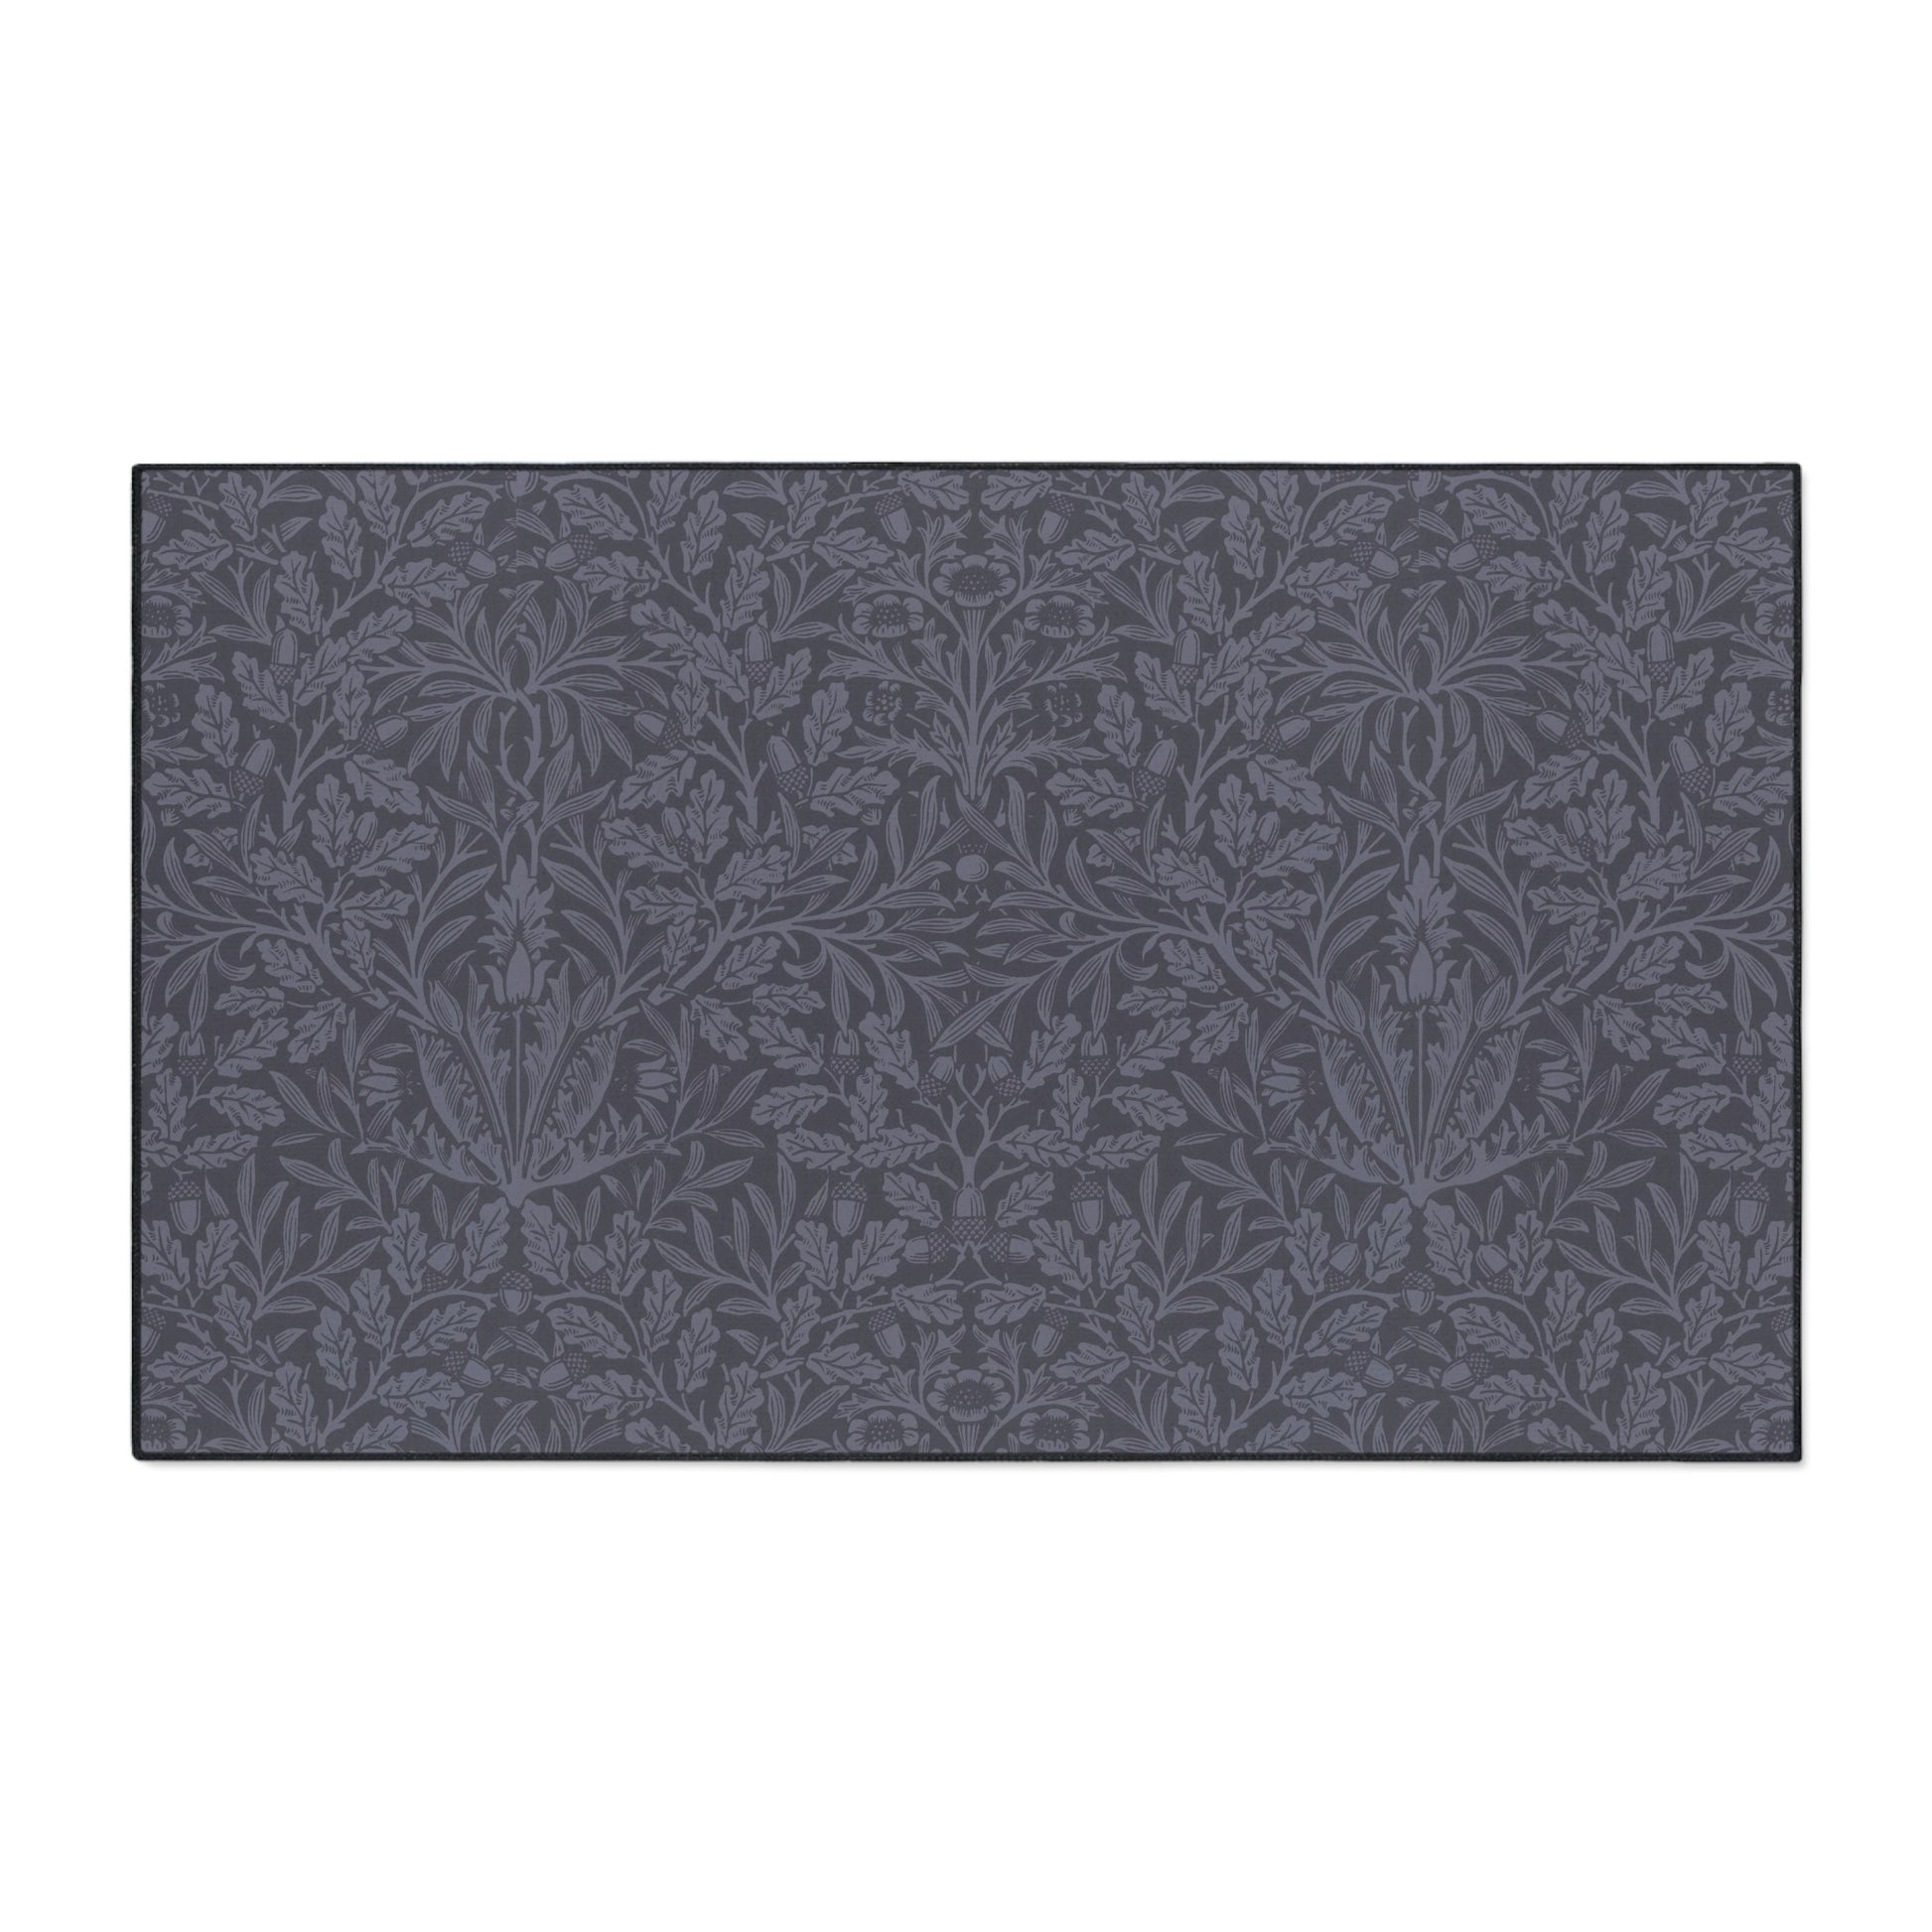 william-morris-co-heavy-duty-floor-mat-acorns-and-oak-leaves-collection-smoky-blue-4